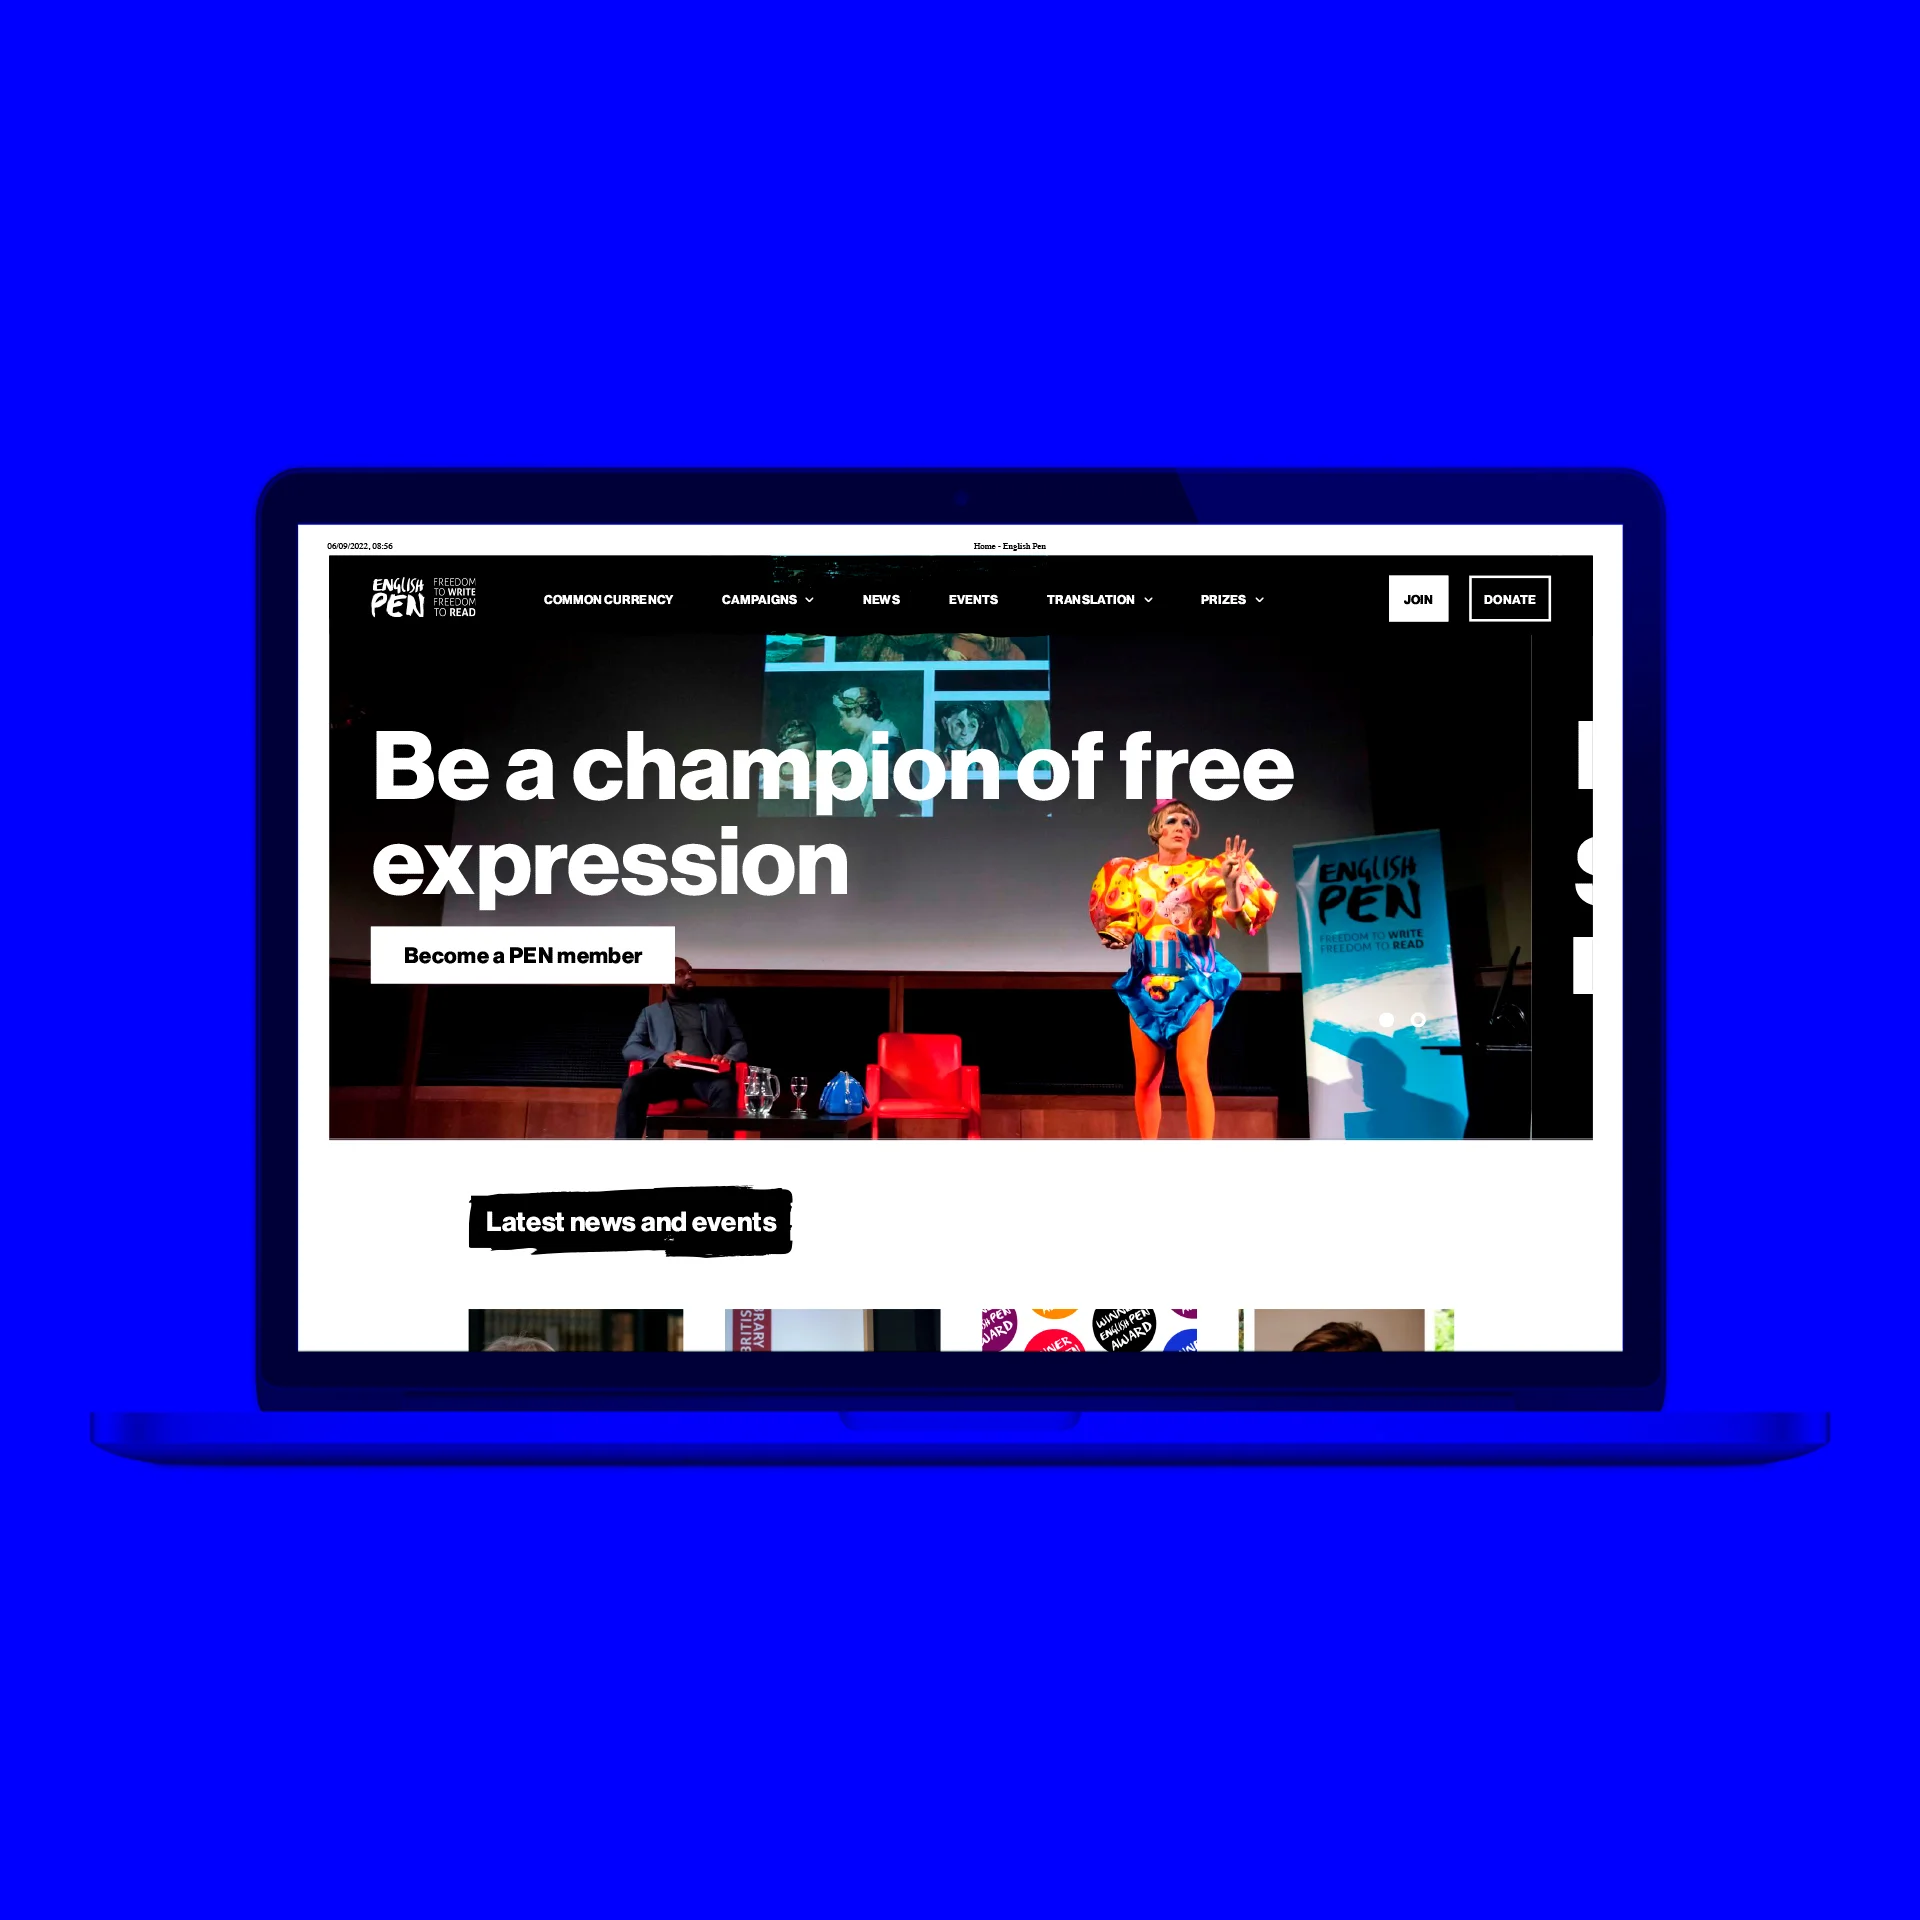 An image of the English PEN website on a blue background.